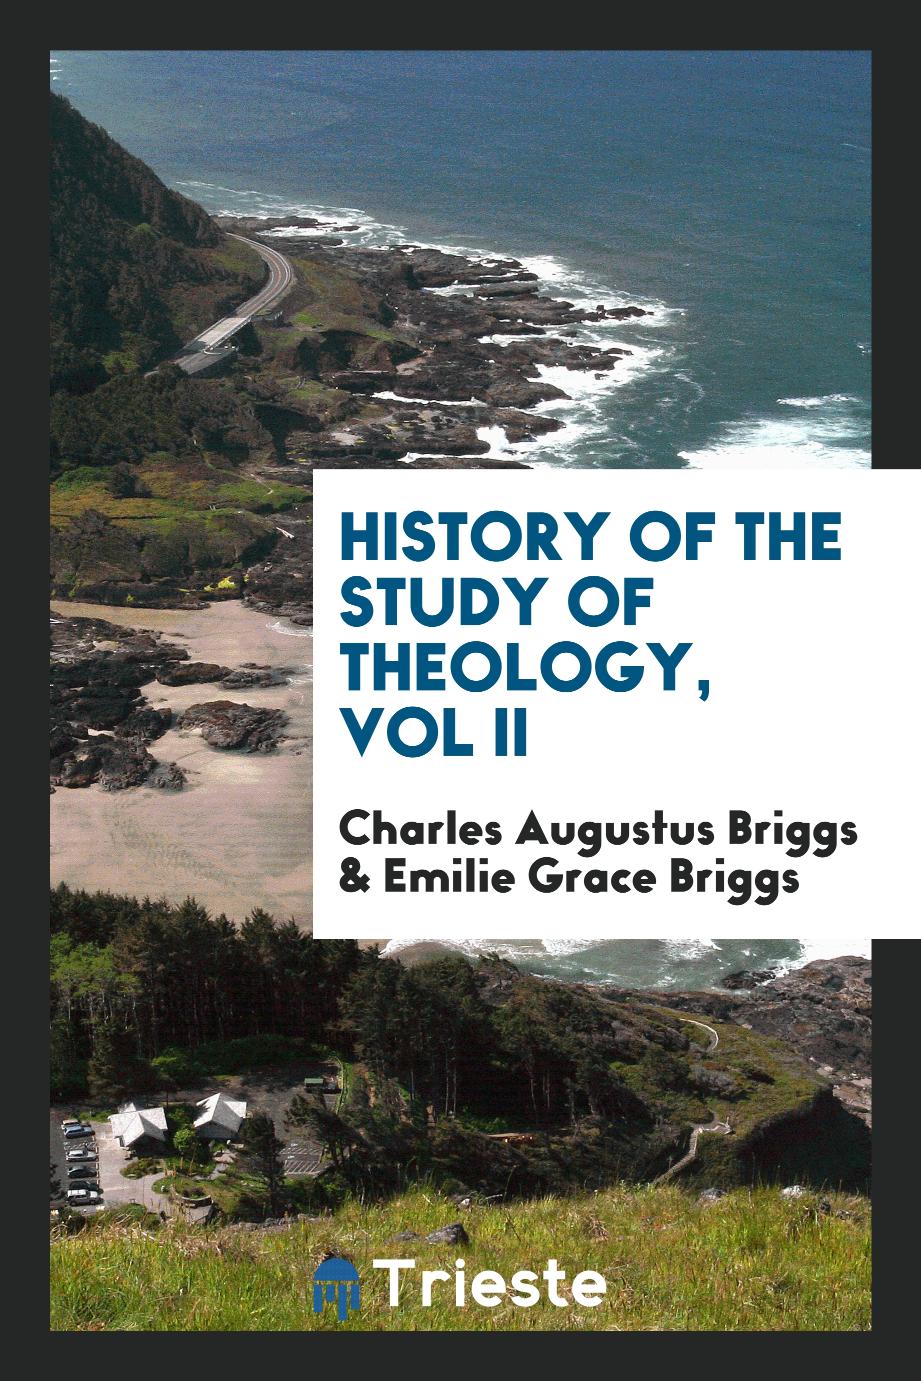 History of the study of theology, Vol II